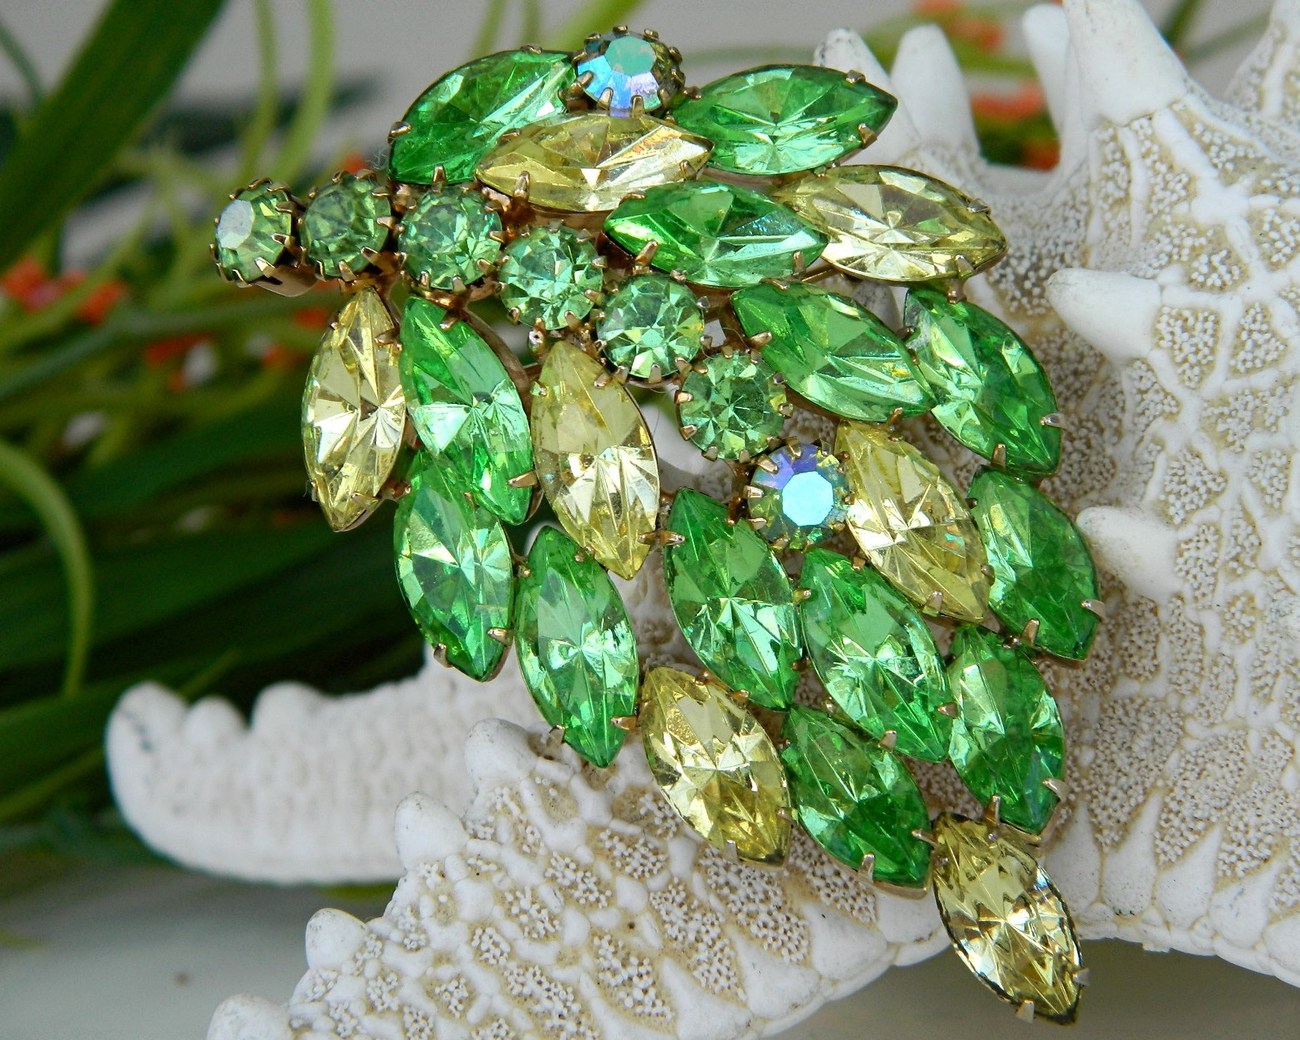 Viintage Brooch with Green and Yellow Stones Outstanding Piece